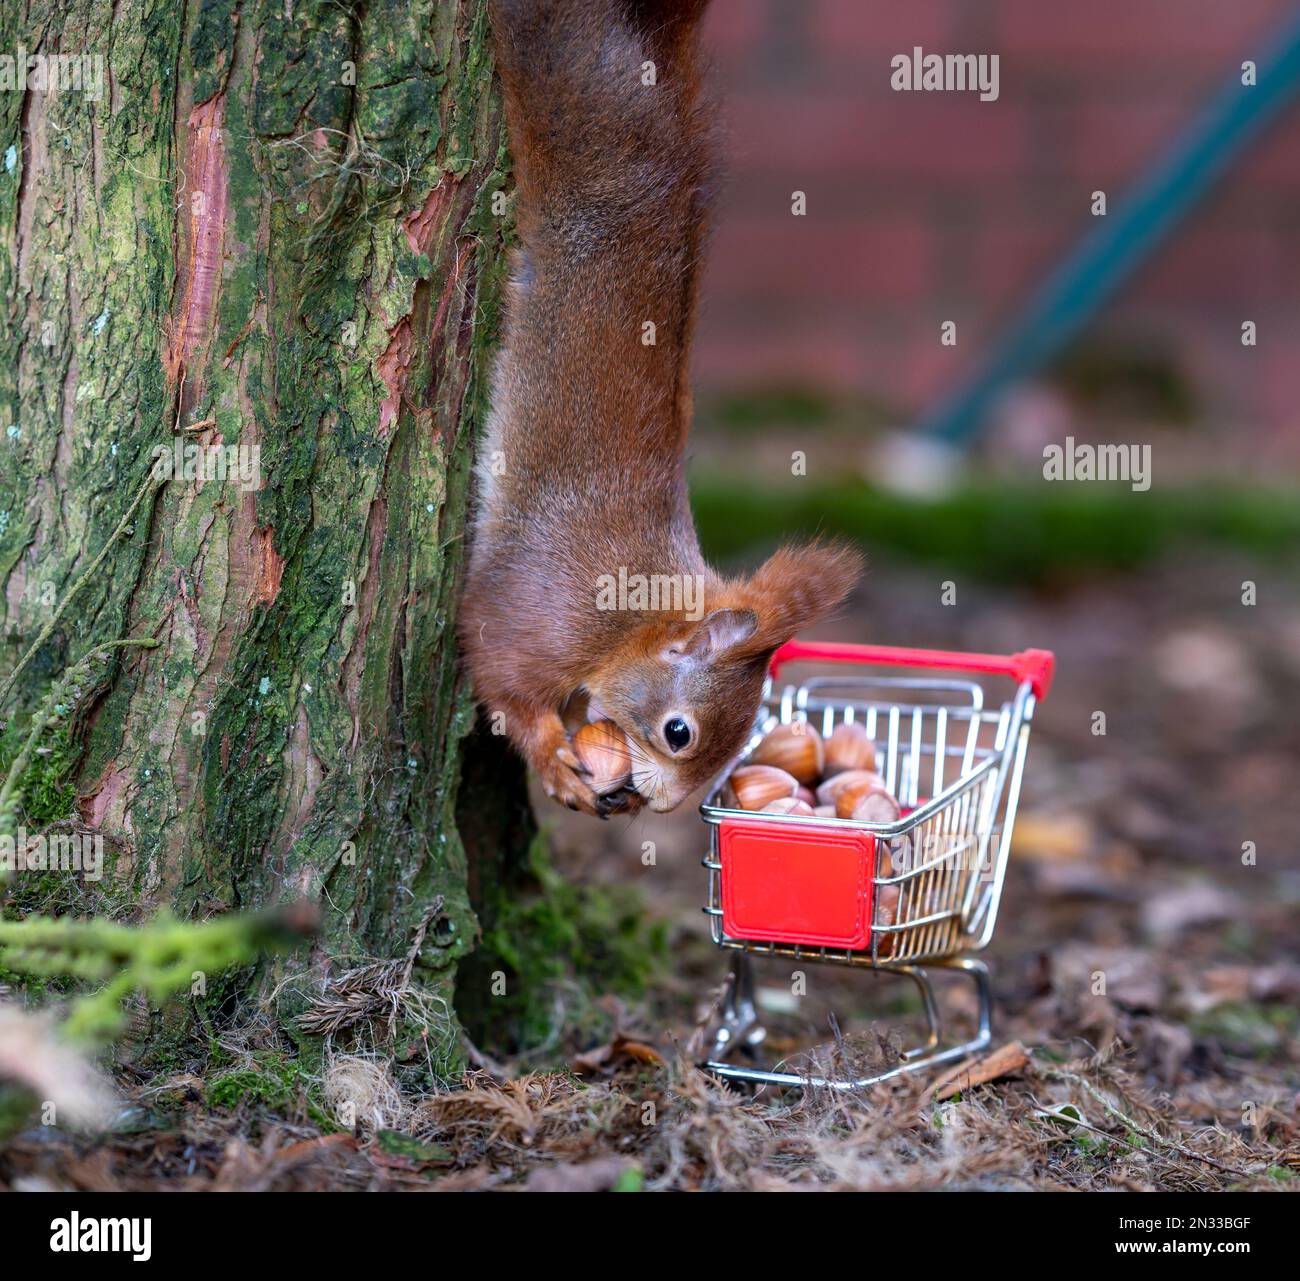 European red squirrel is hanging upside down on a tree and is collecting hazelnuts in a shopping trolley. Stock Photo